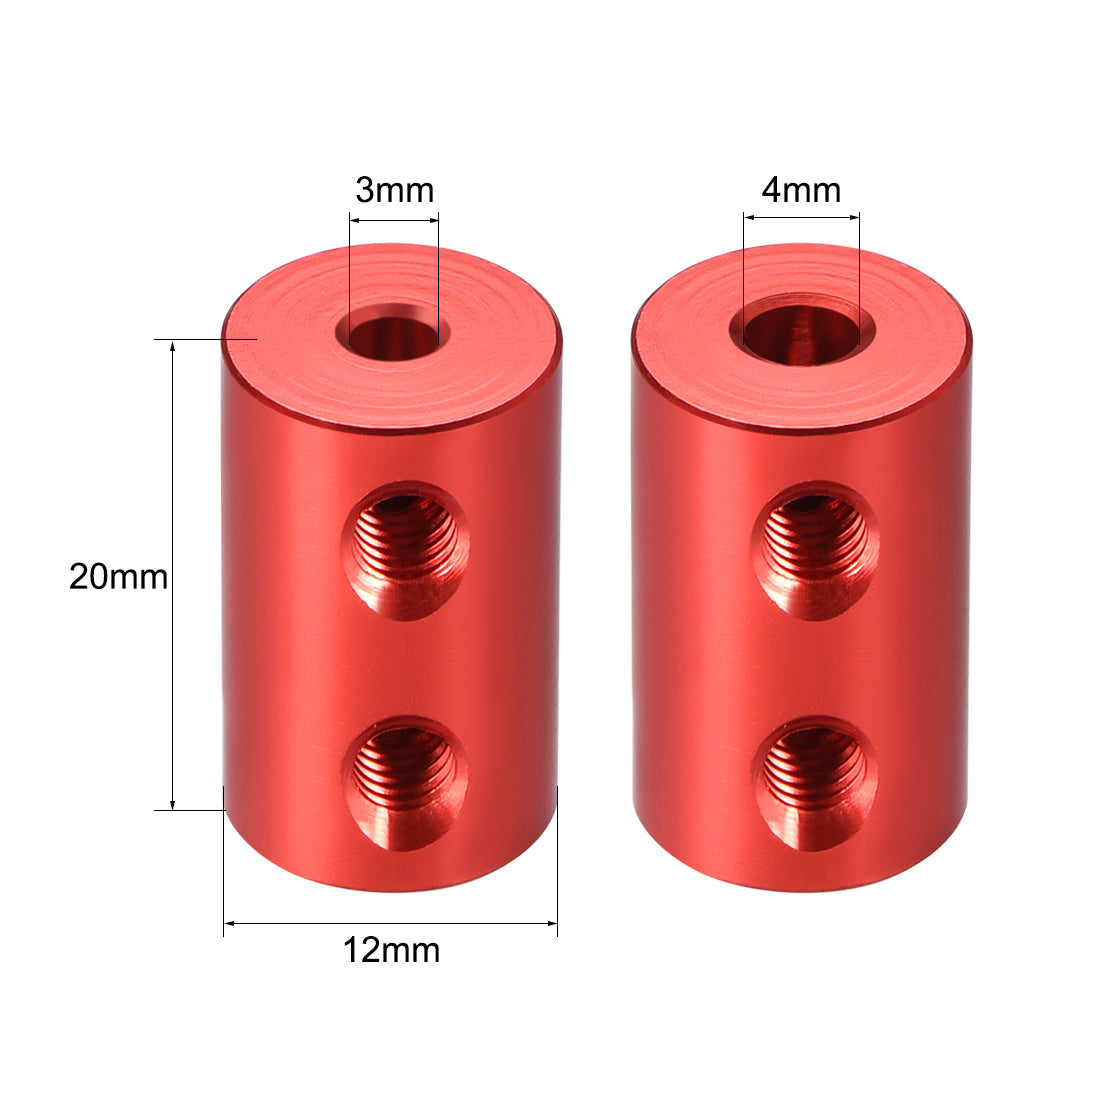 uxcell Uxcell Shaft Coupling 3mm to 4mm Bore L20xD12 Robot Motor Wheel Rigid Coupler Connector Red 2 Pcs